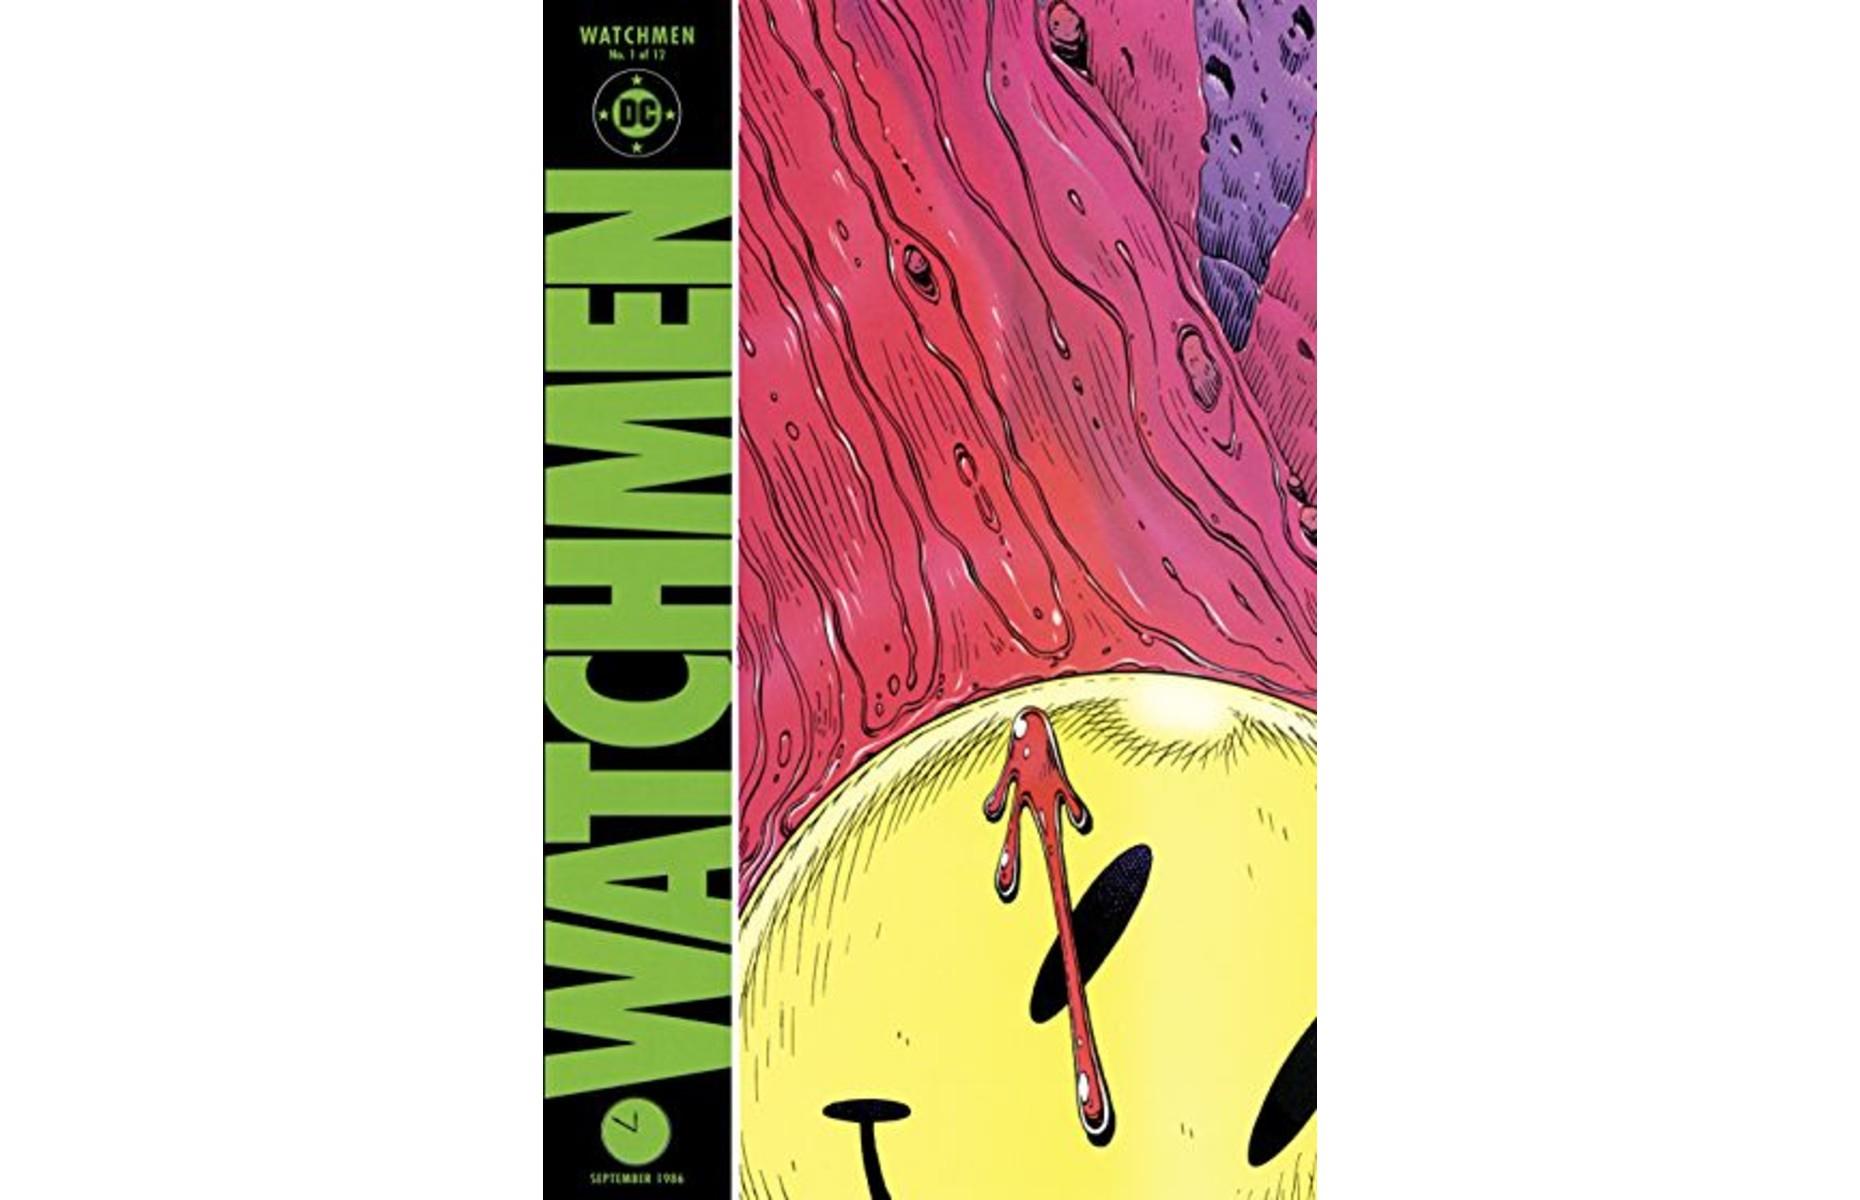 Watchmen #1: up to £515 ($675)